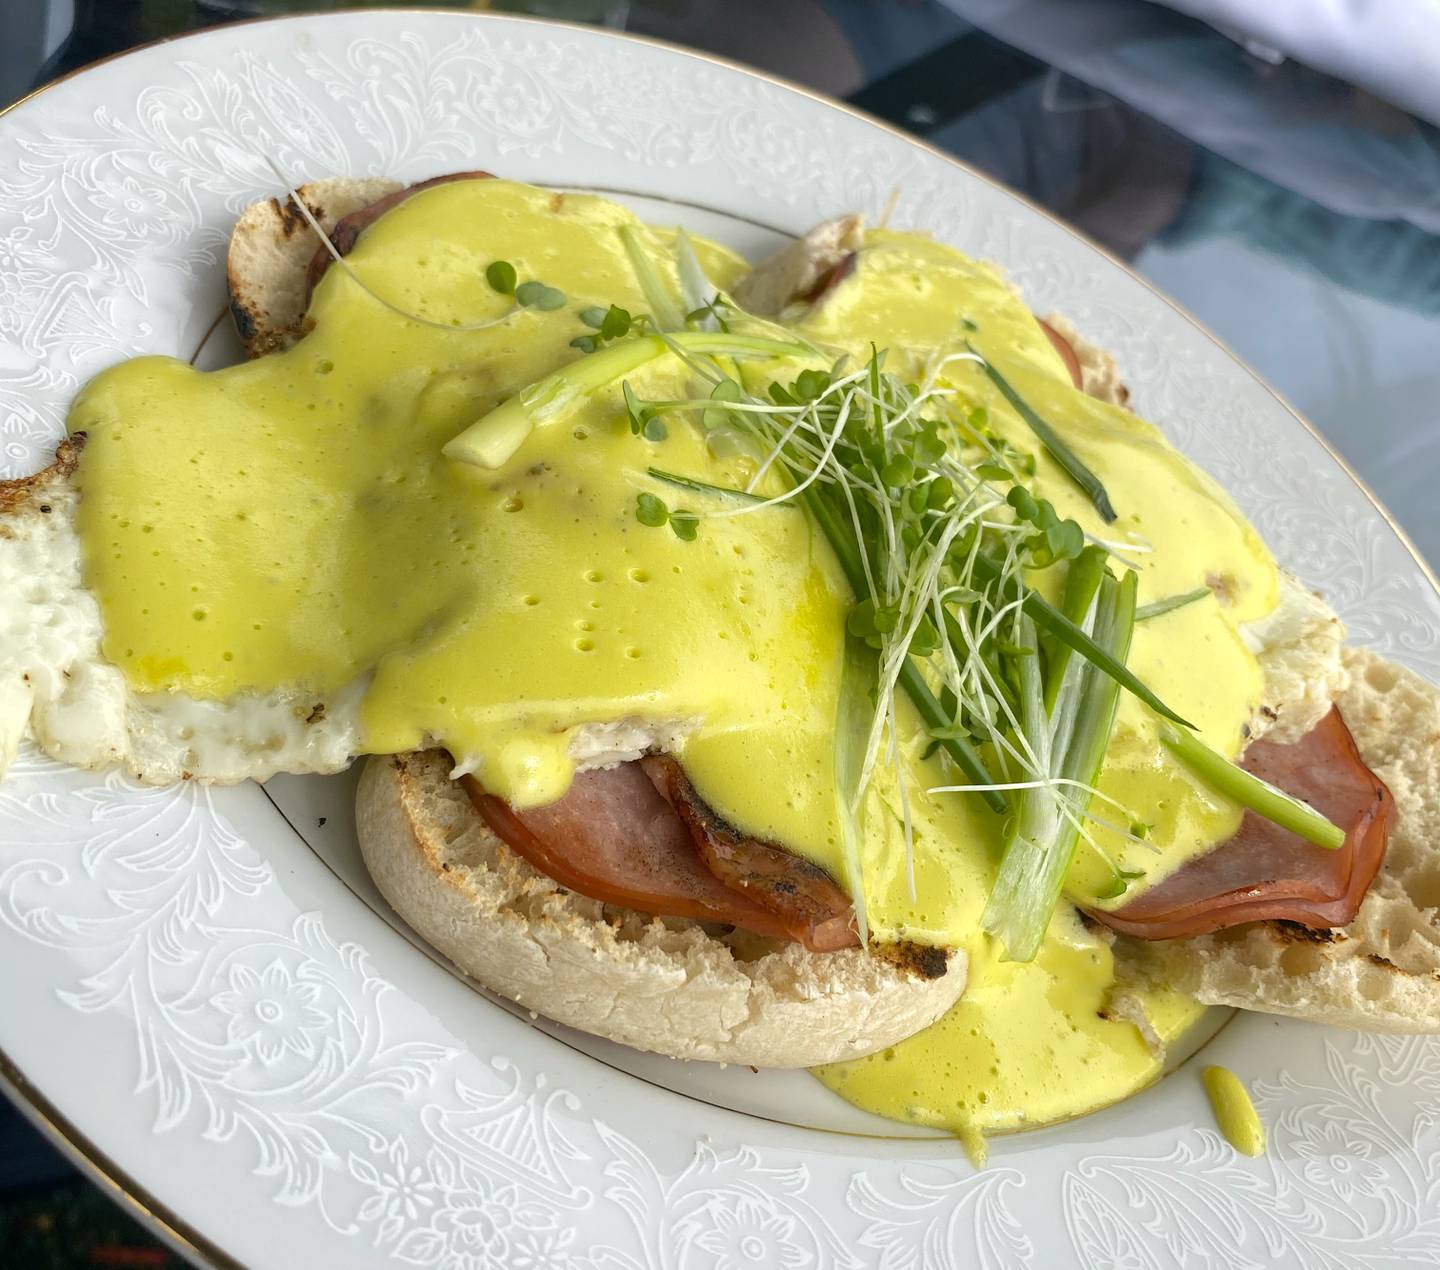 The eggs benedict at Launch Kitchen are served with over easy eggs instead of the traditional poached.